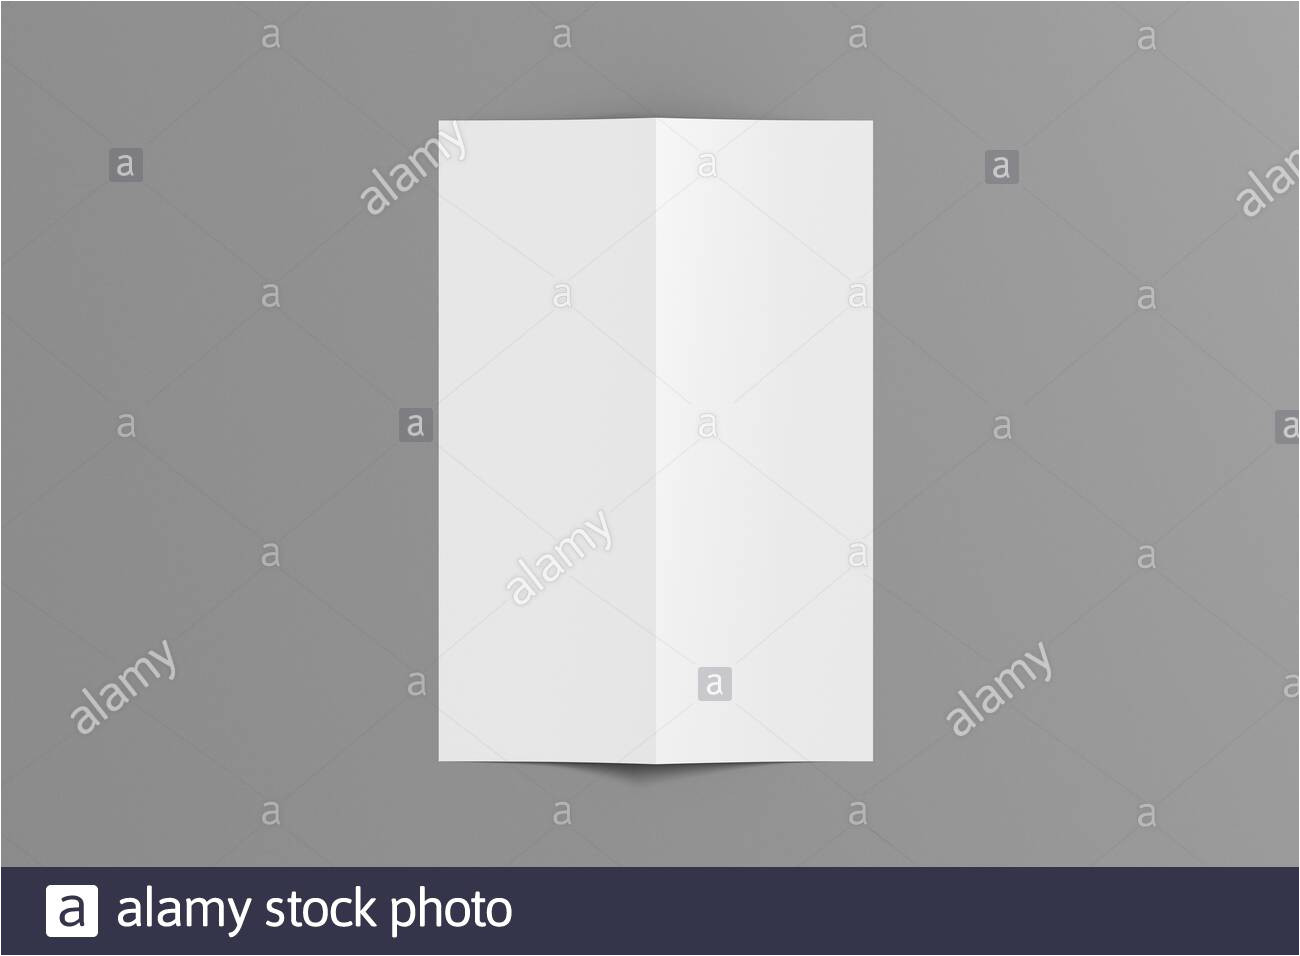 blank vertical a4 leaflet cover on gray background bi fold or half fold opened brochure isolated with clipping path view directly above 3d illustra 2bc9h9m jpg